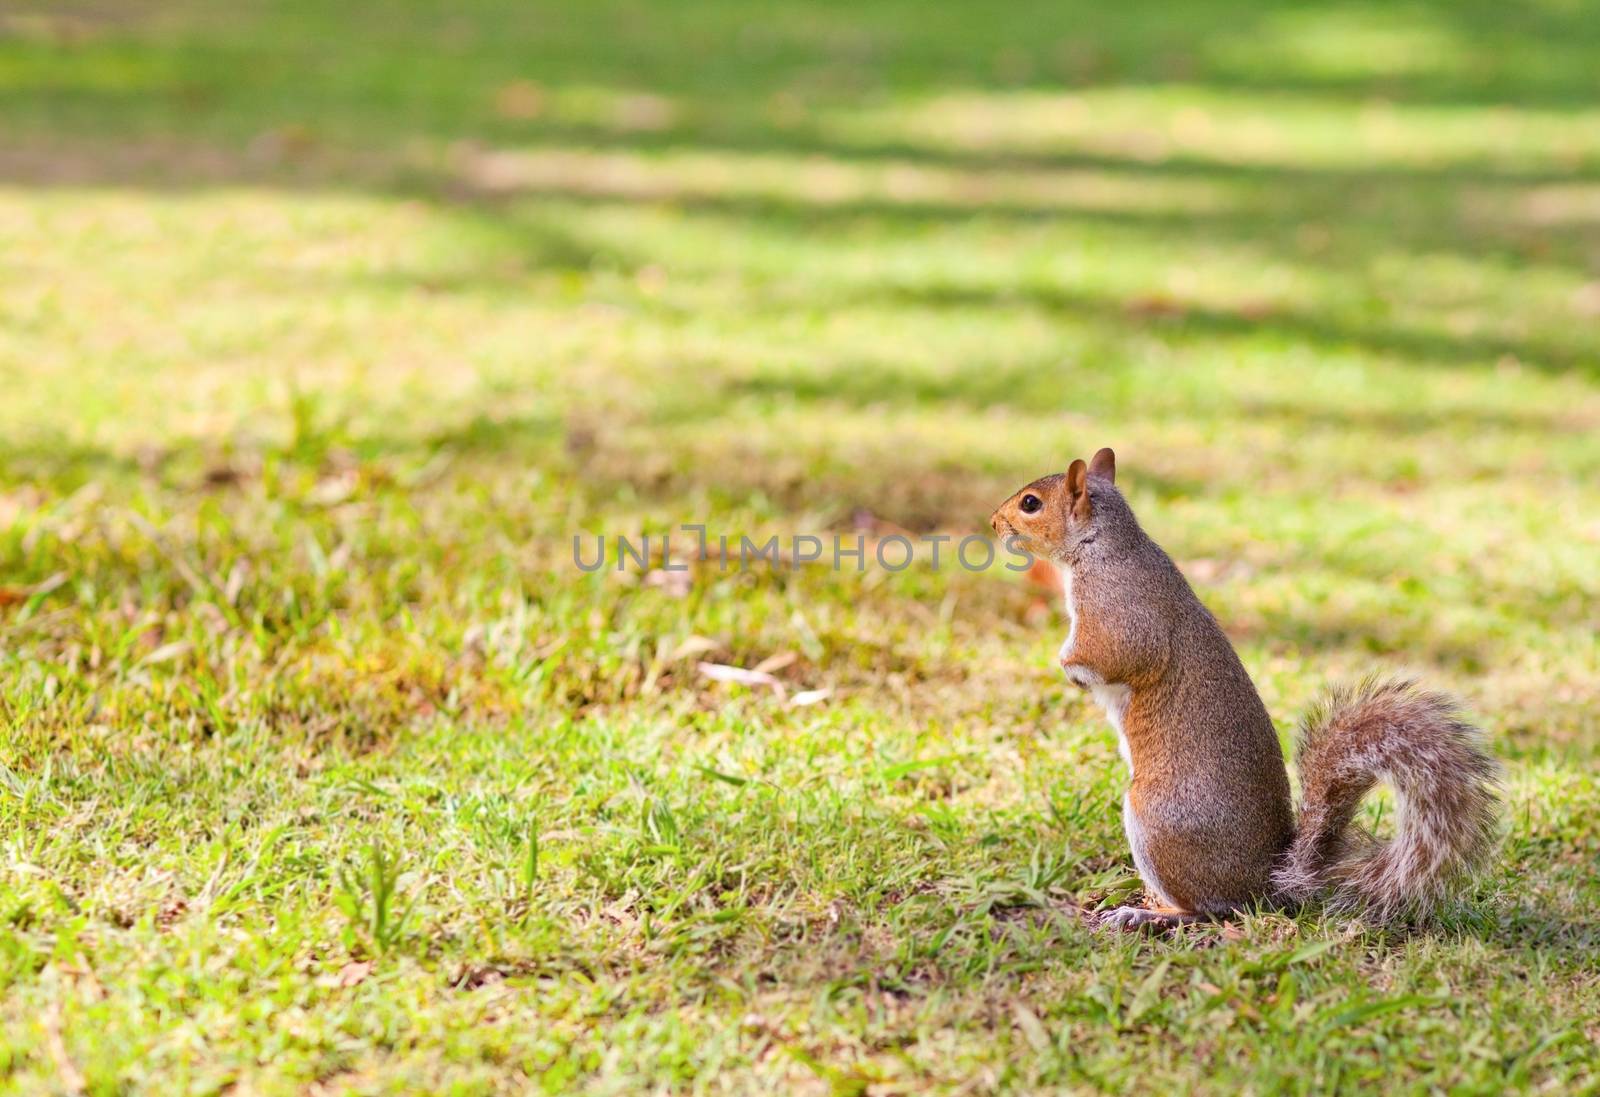 Squirrel in the park during the summer